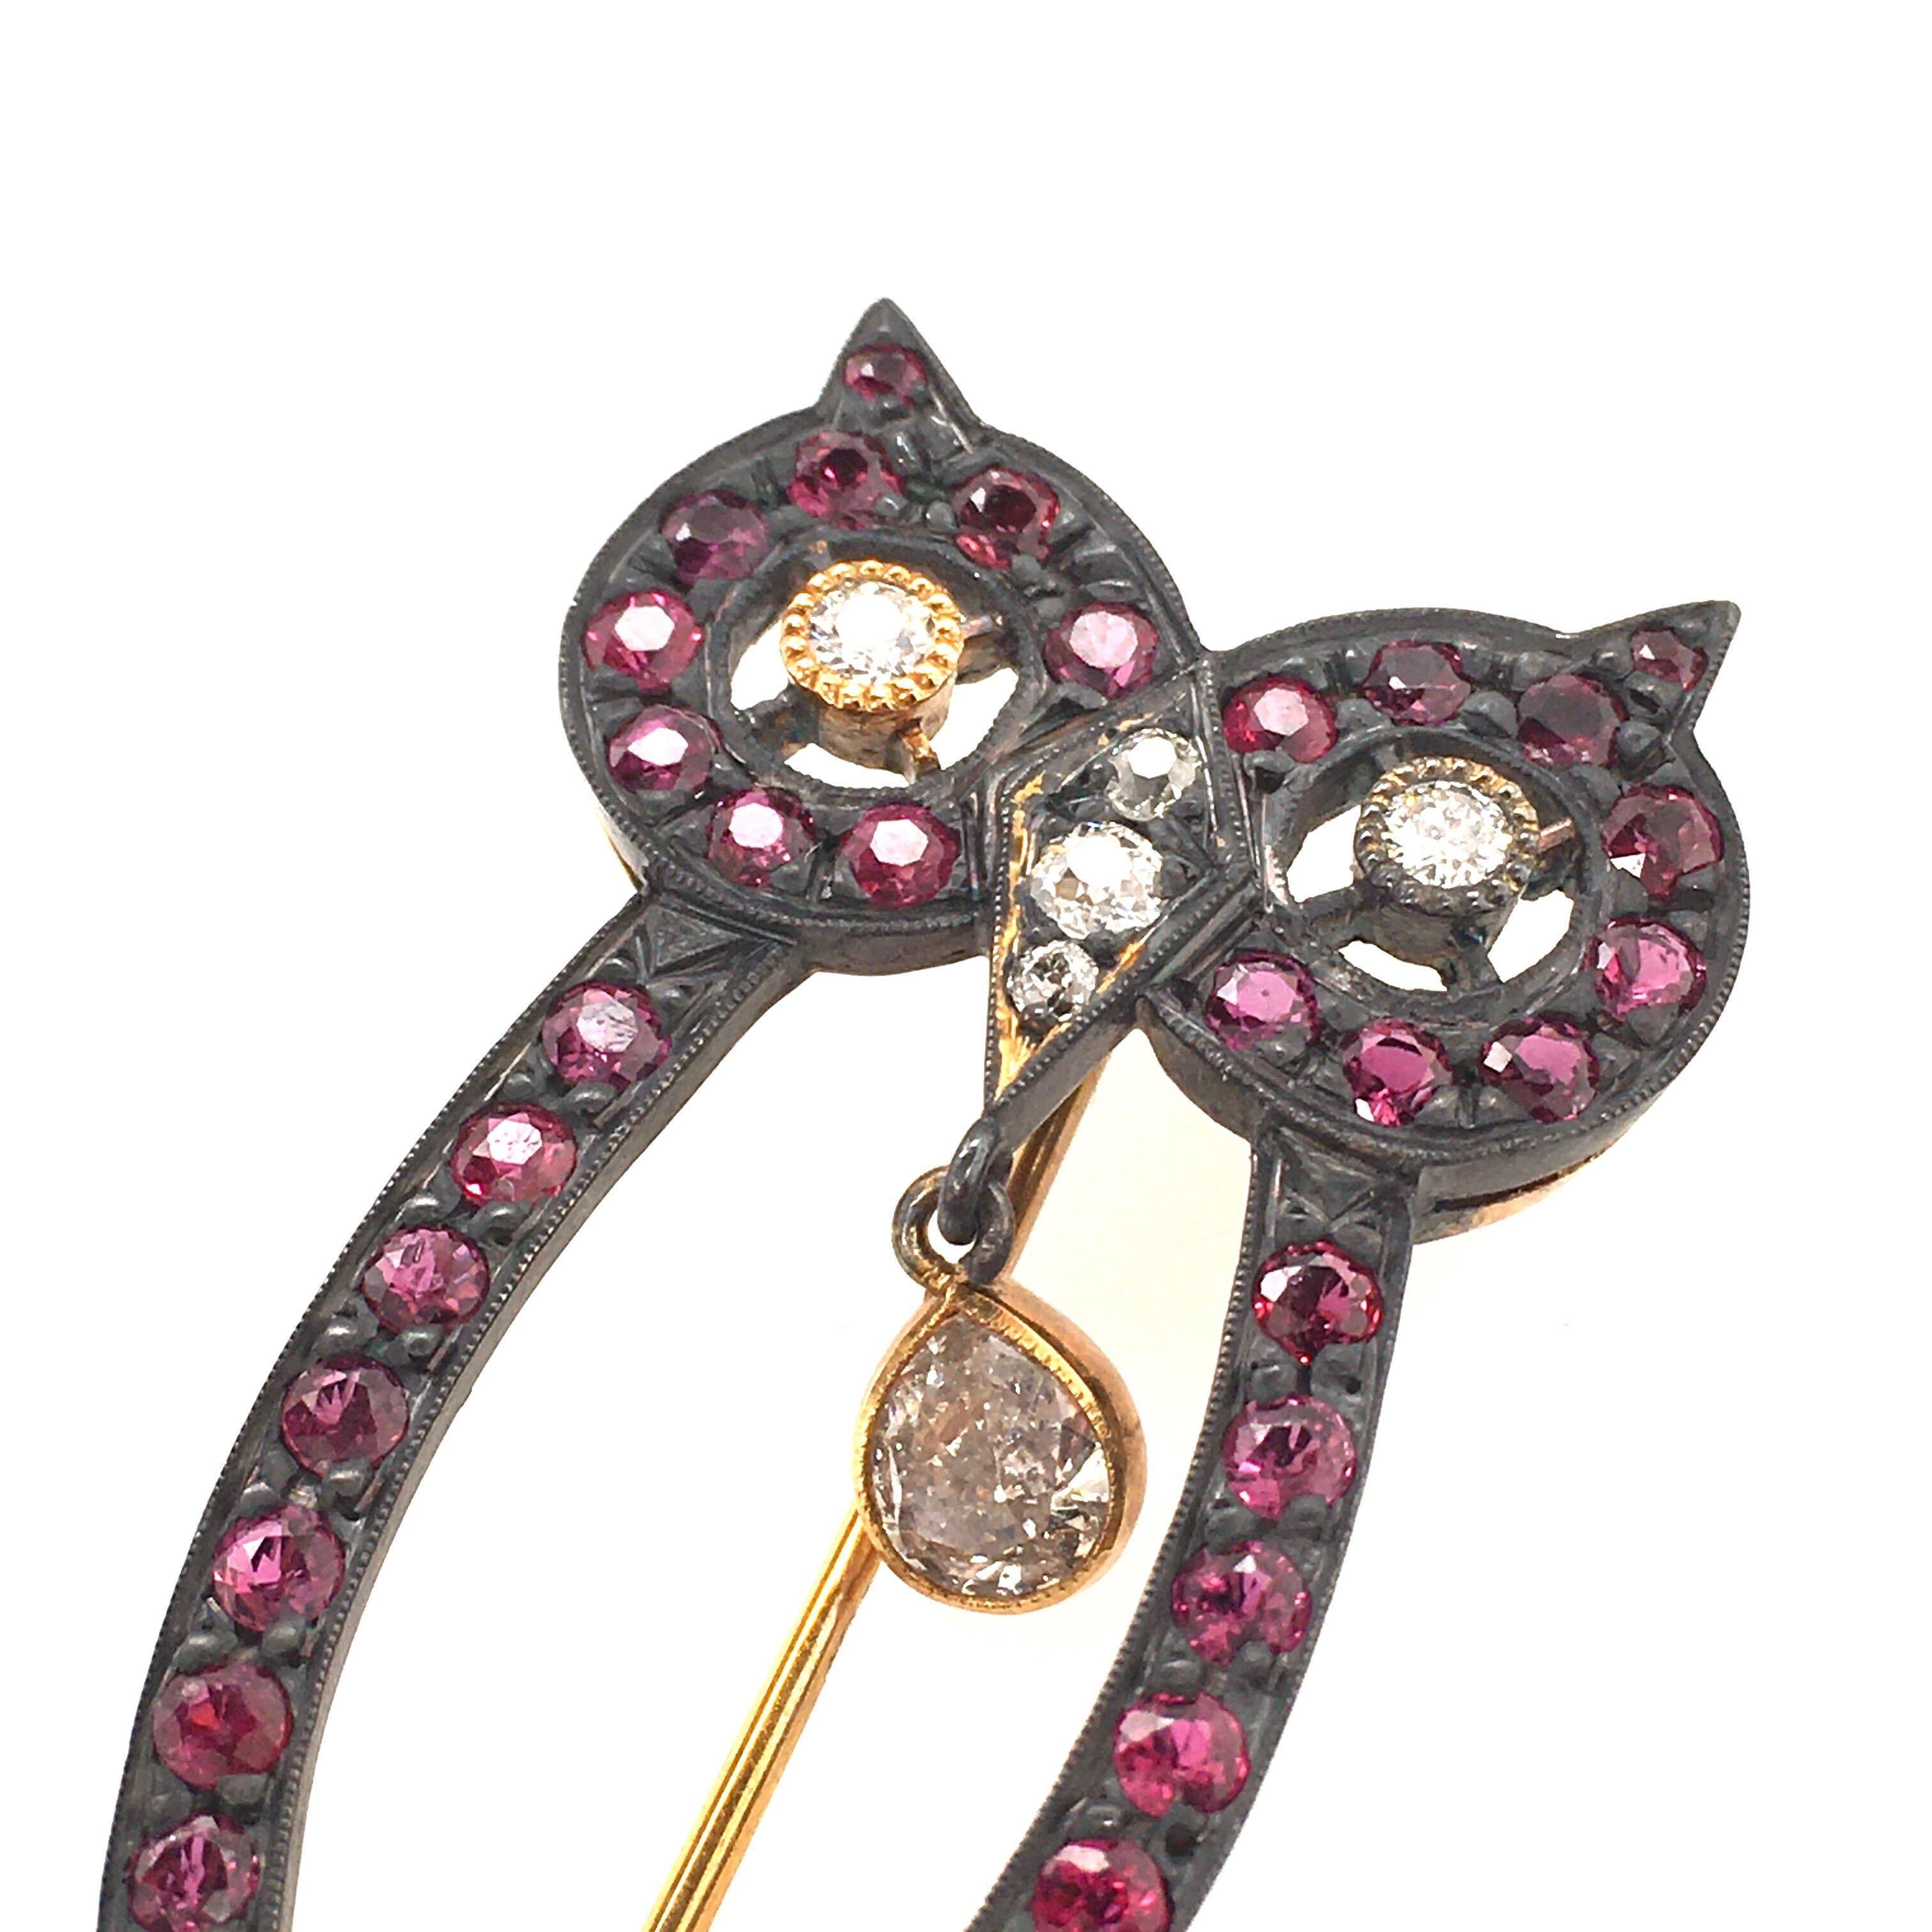 A 14 karat yellow gold, silver topped, ruby and diamond owl brooch. Designed as  a pave set ruby openwork owl, enhanced by circular cut diamonds, suspending a pear shaped diamond, weighing approximately 0.25 carat. Length is approximately 1 3/4